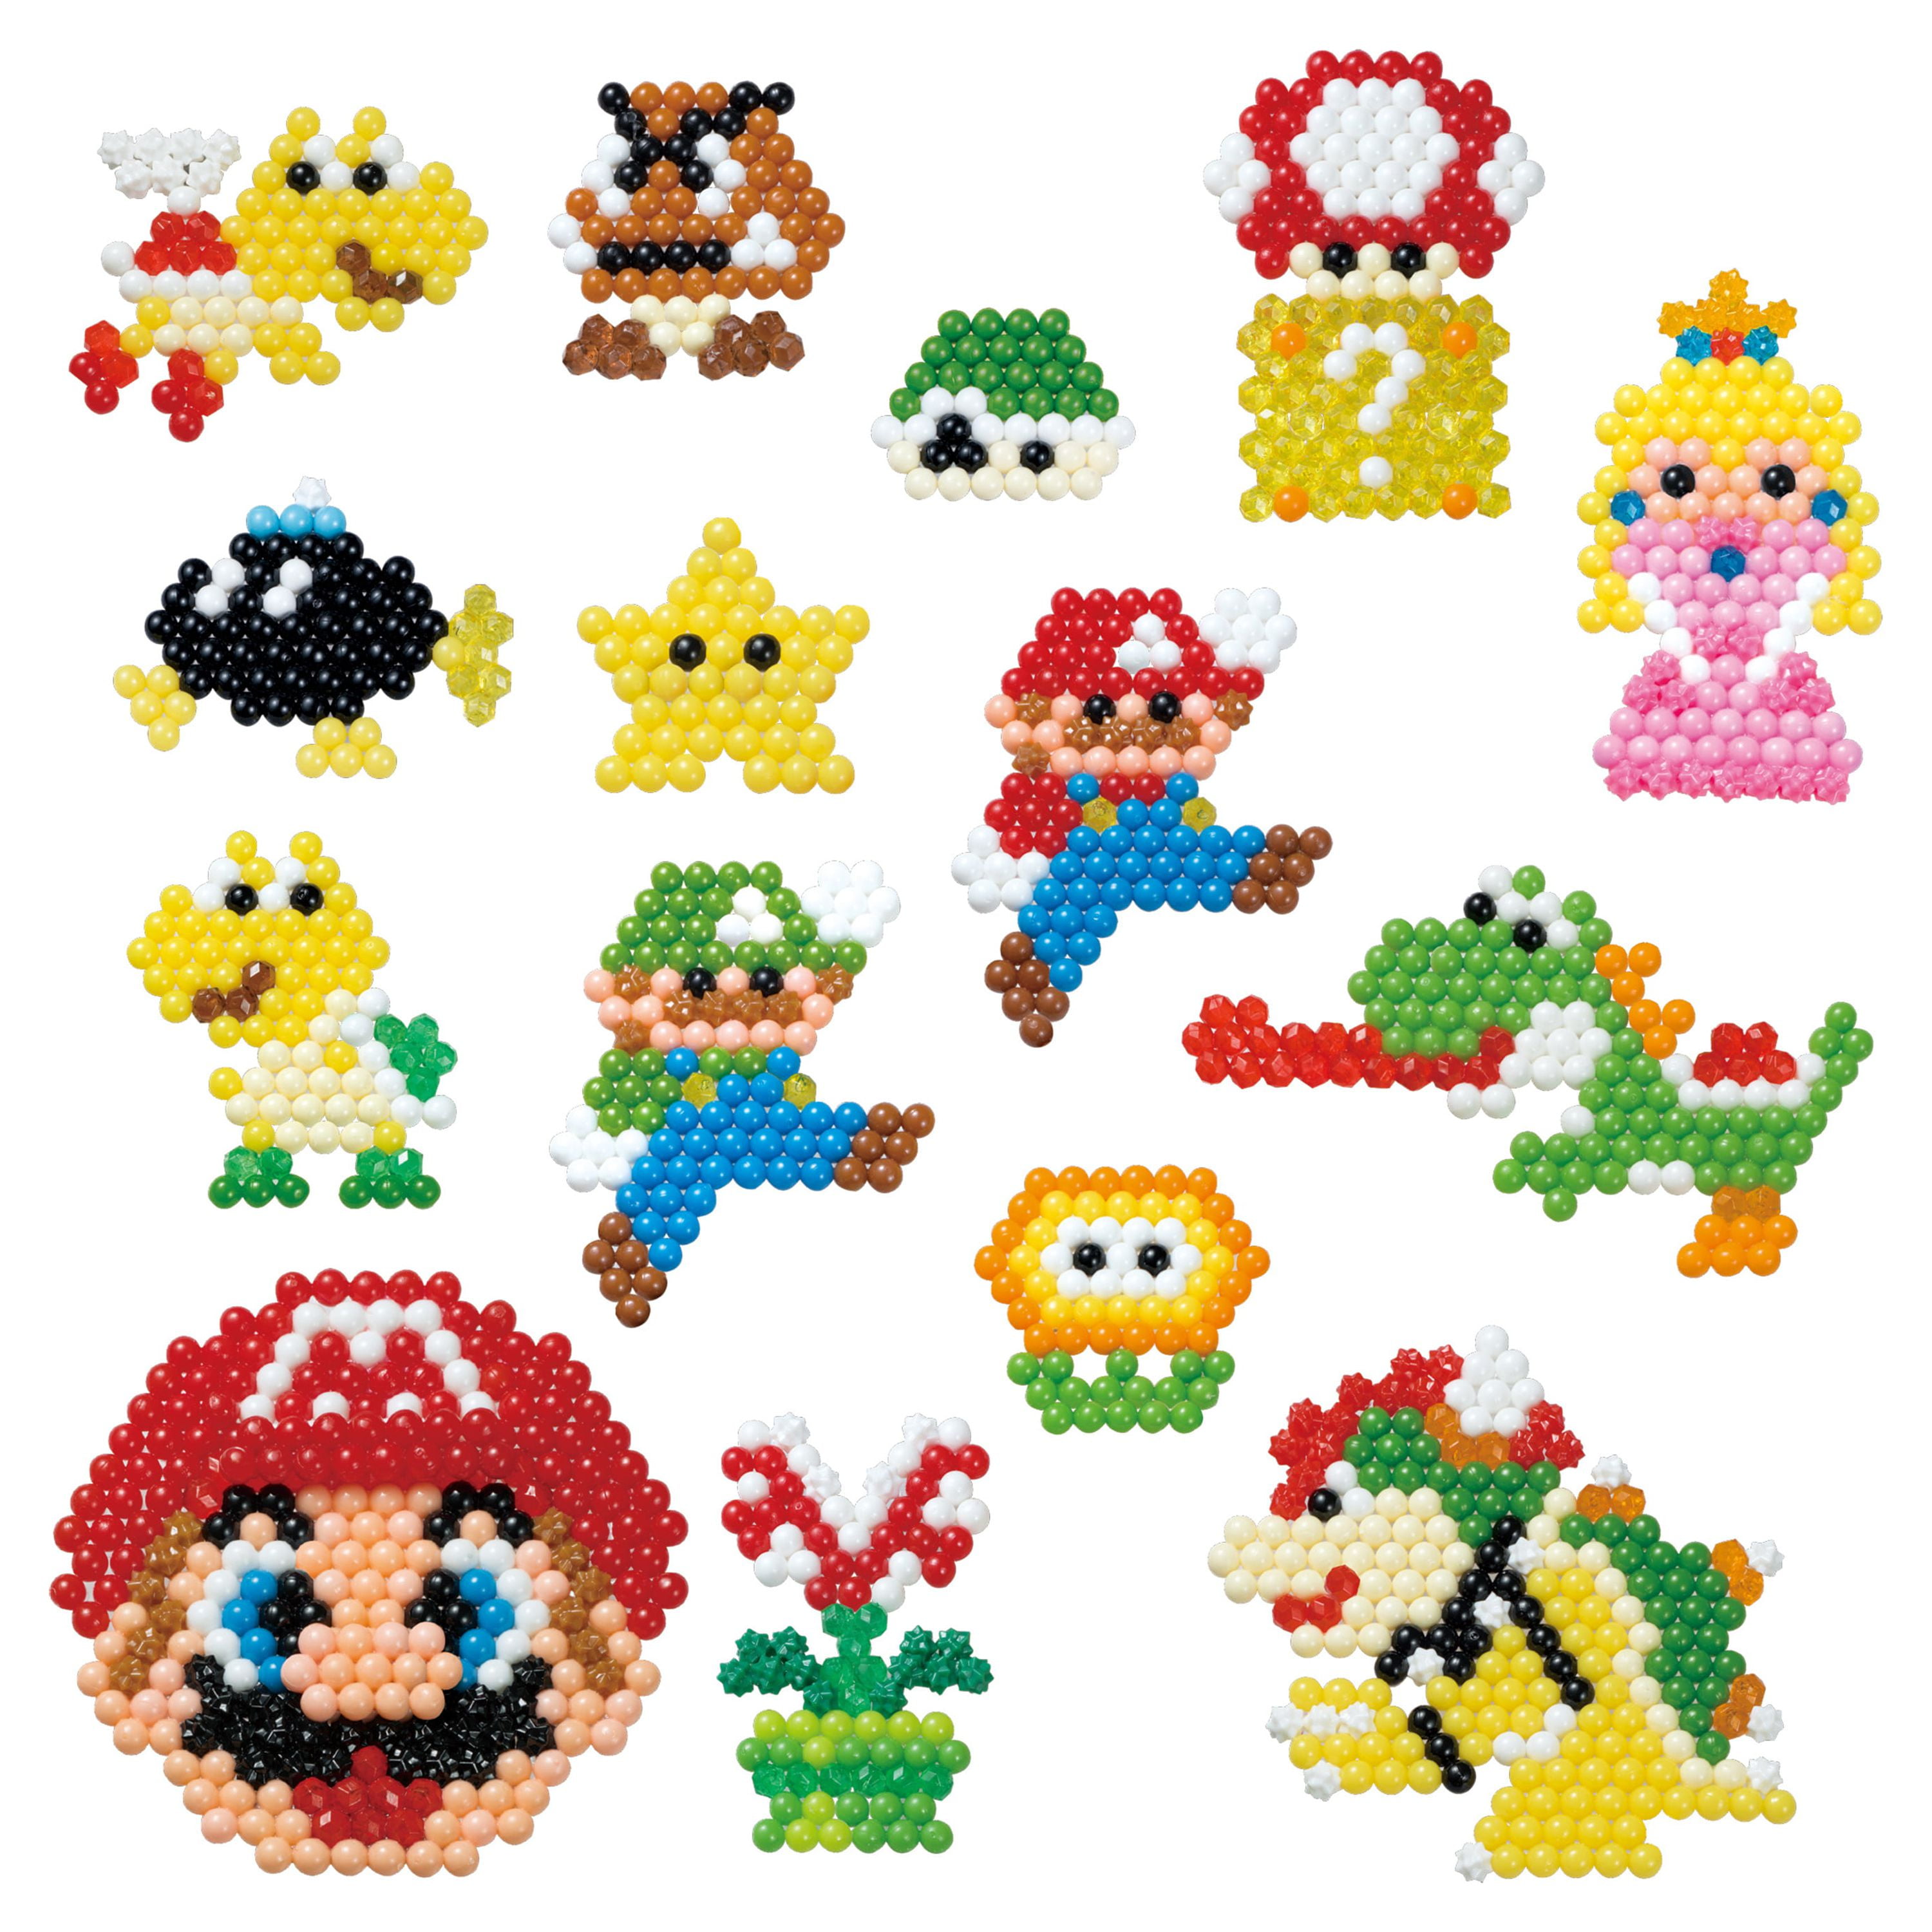 Aquabeads Super Mario Character Set, Complete Arts & Crafts Kit for  Children - over 600 Beads to create Mario, Luigi, Princess Peach and more